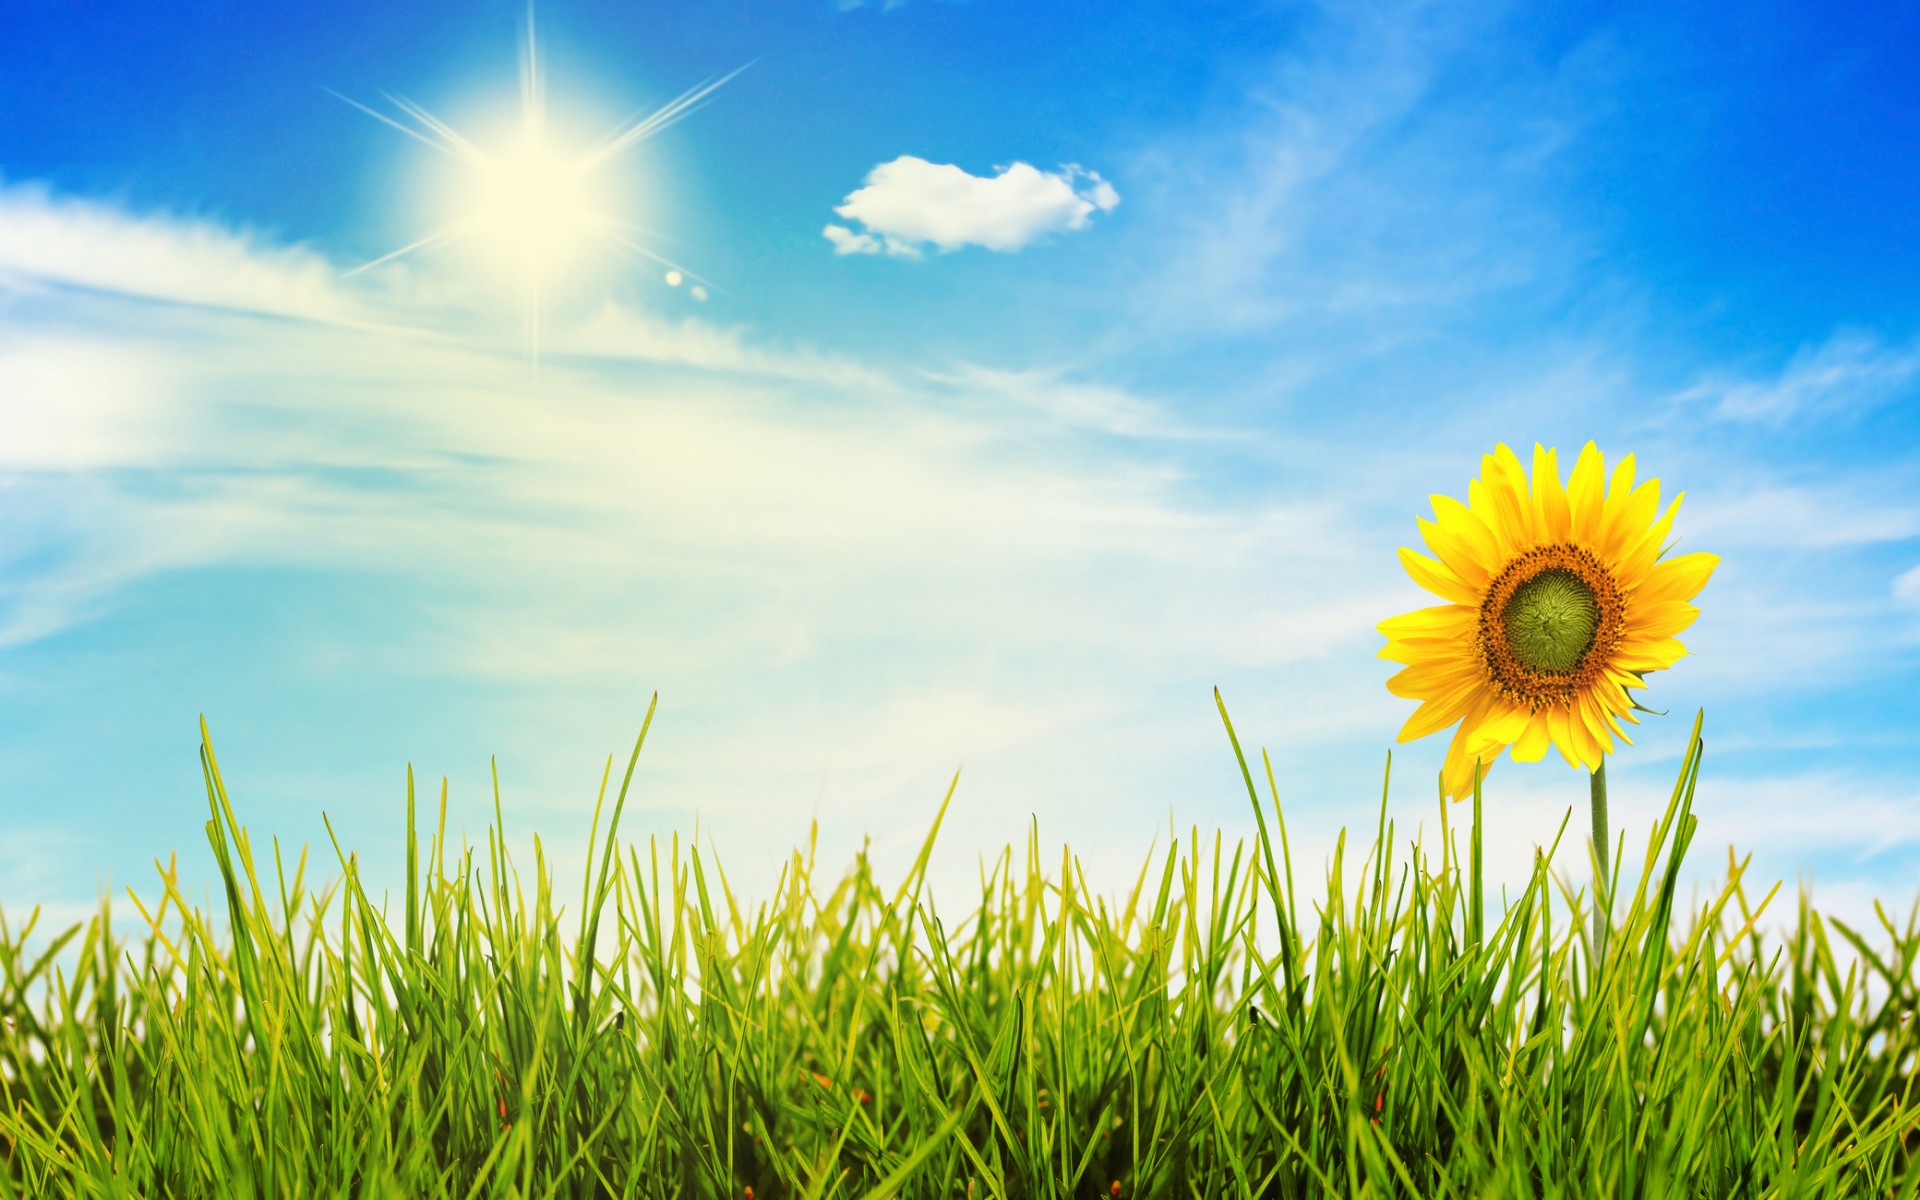 Sunny Day Wallpaper By Paul Senna On Fl Nature HDq Kb